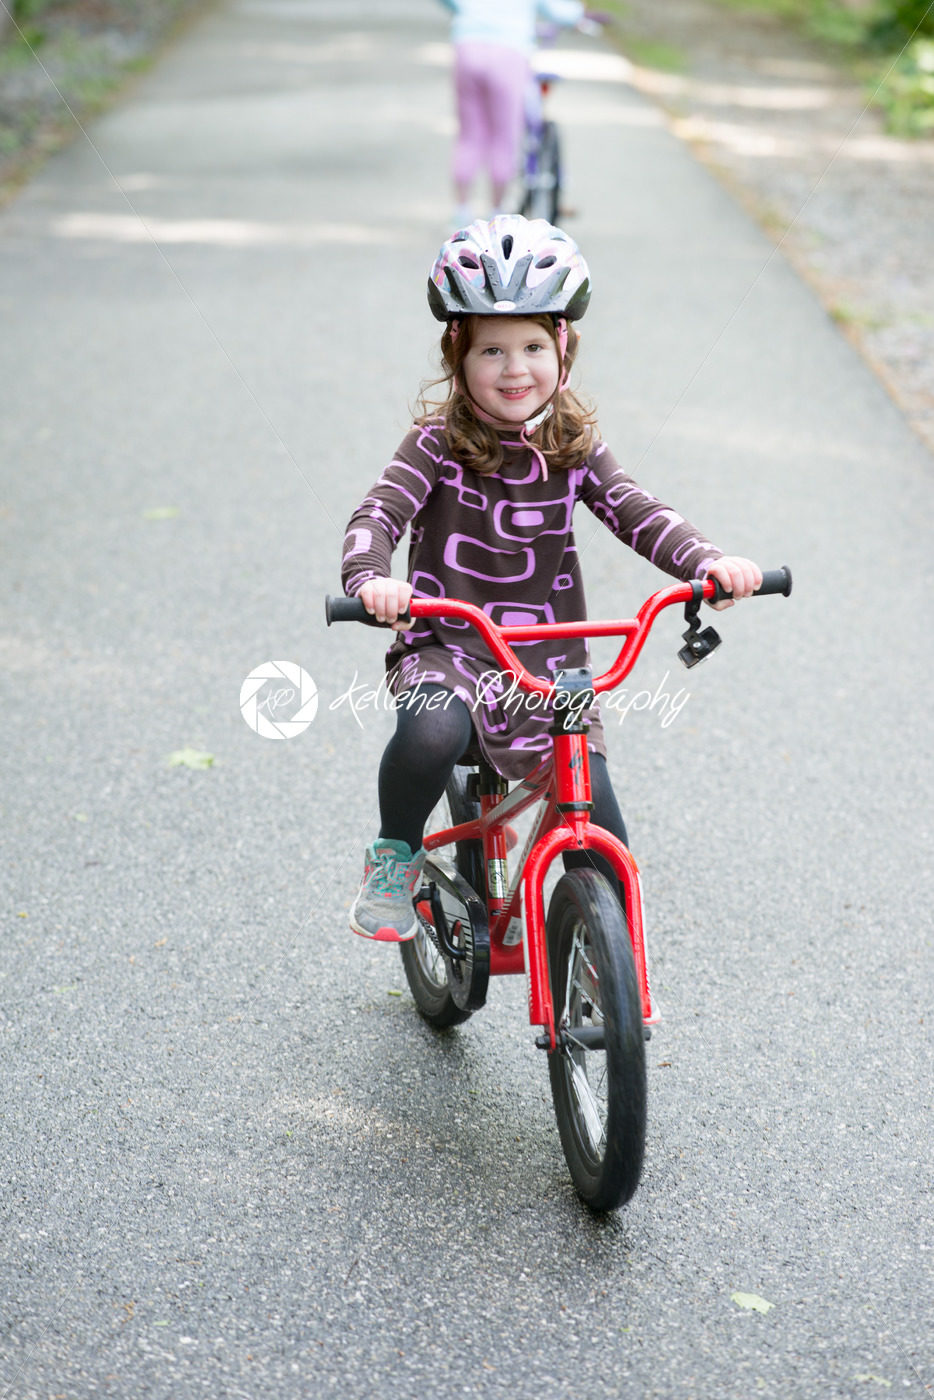 Young Girl Riding Bike on paved trail - Kelleher Photography Store